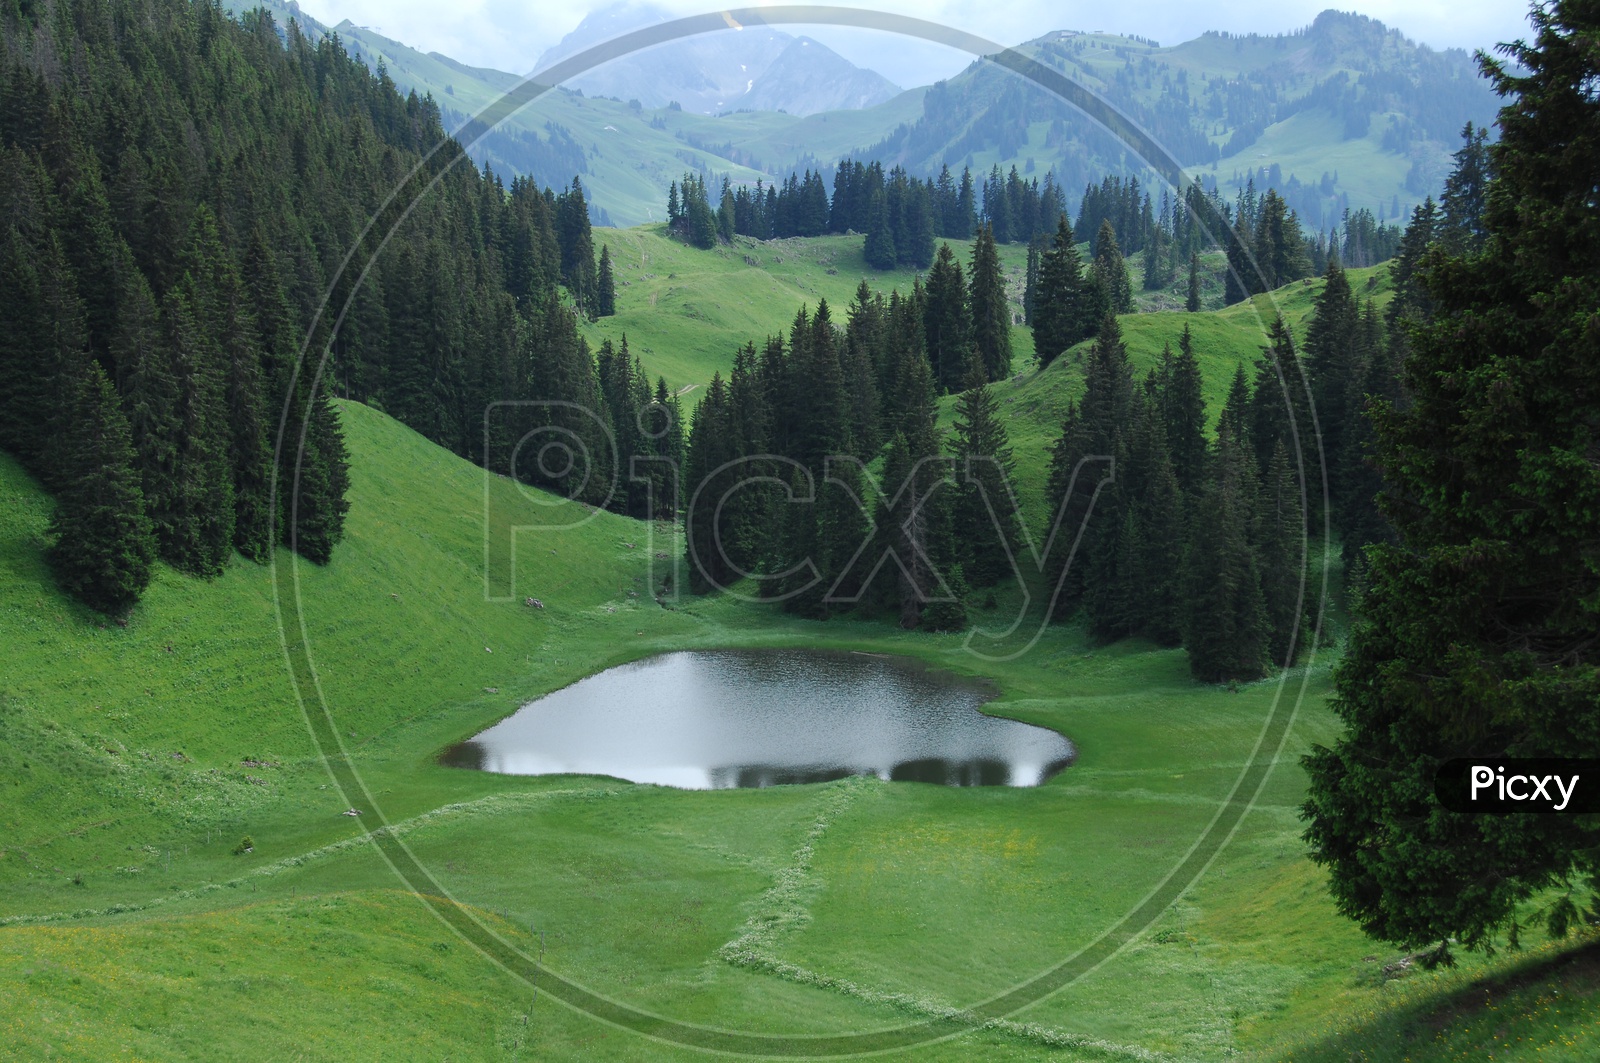 Landscape of Swiss Alps alongside the spruce trees and green meadow